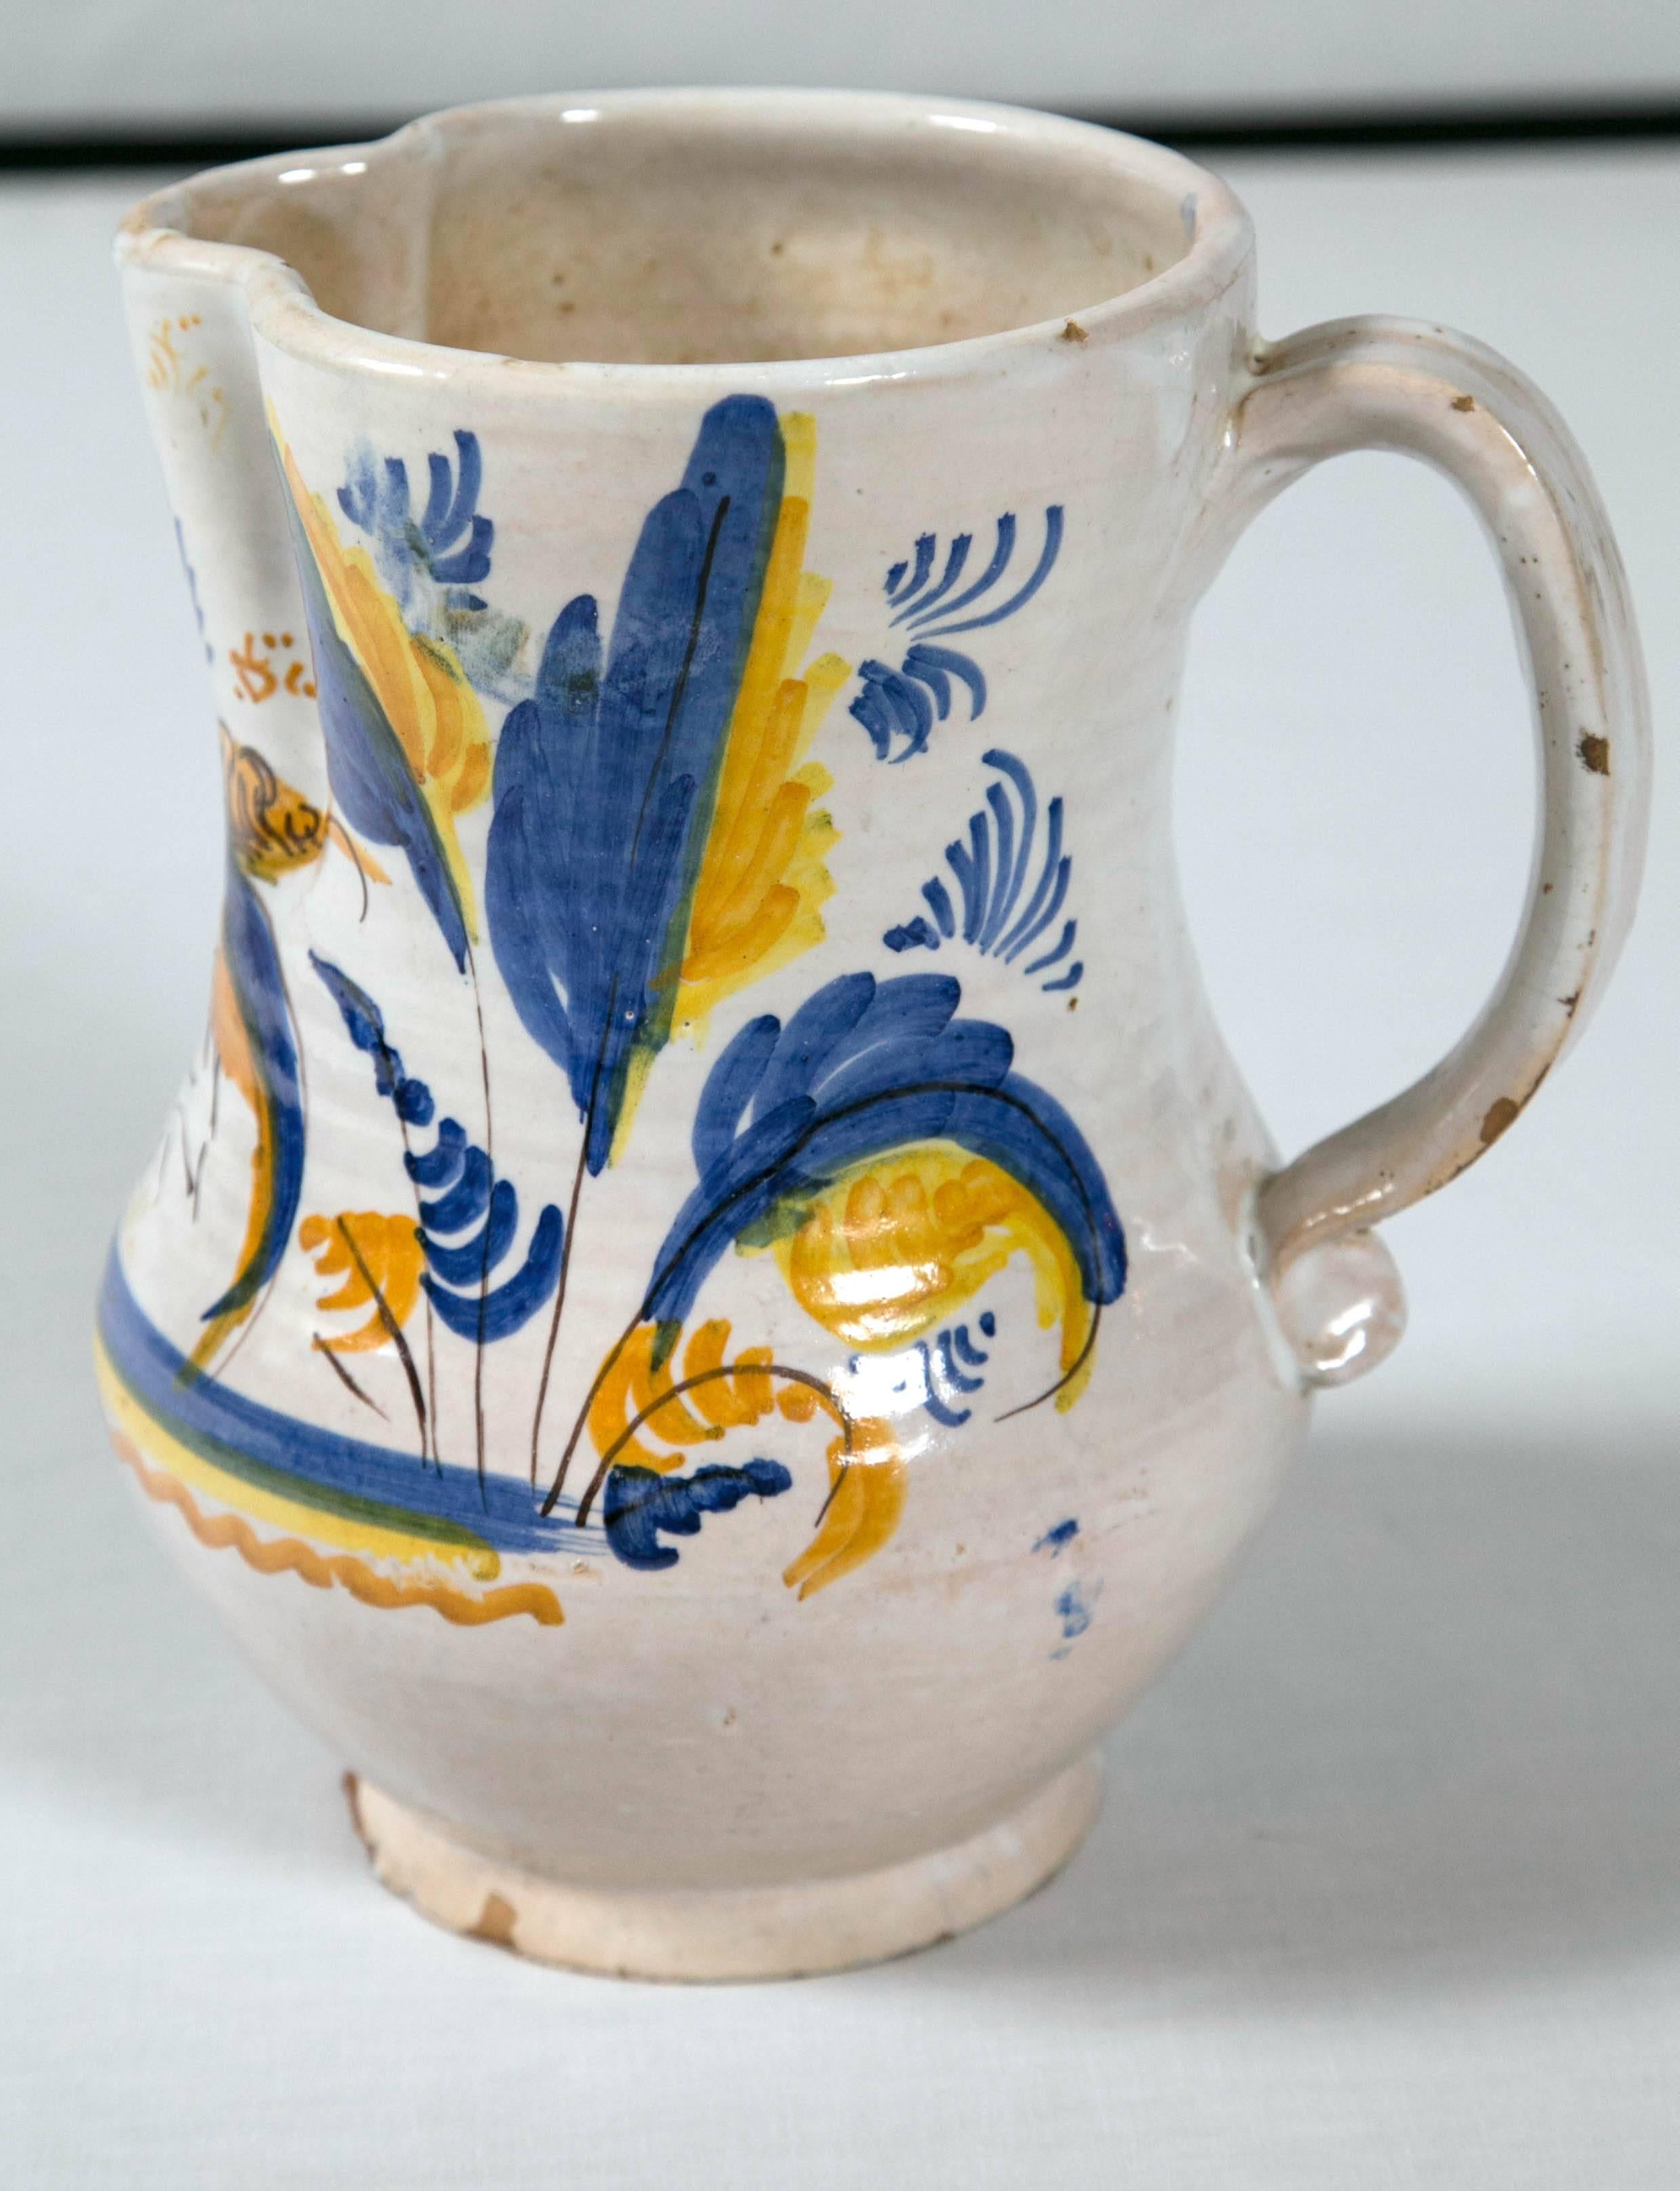 French Faience pottery pitcher, circa 1900. Charming hand-painted blue and yellow design typical of the south of France. Stylized bird and foliate motifs.